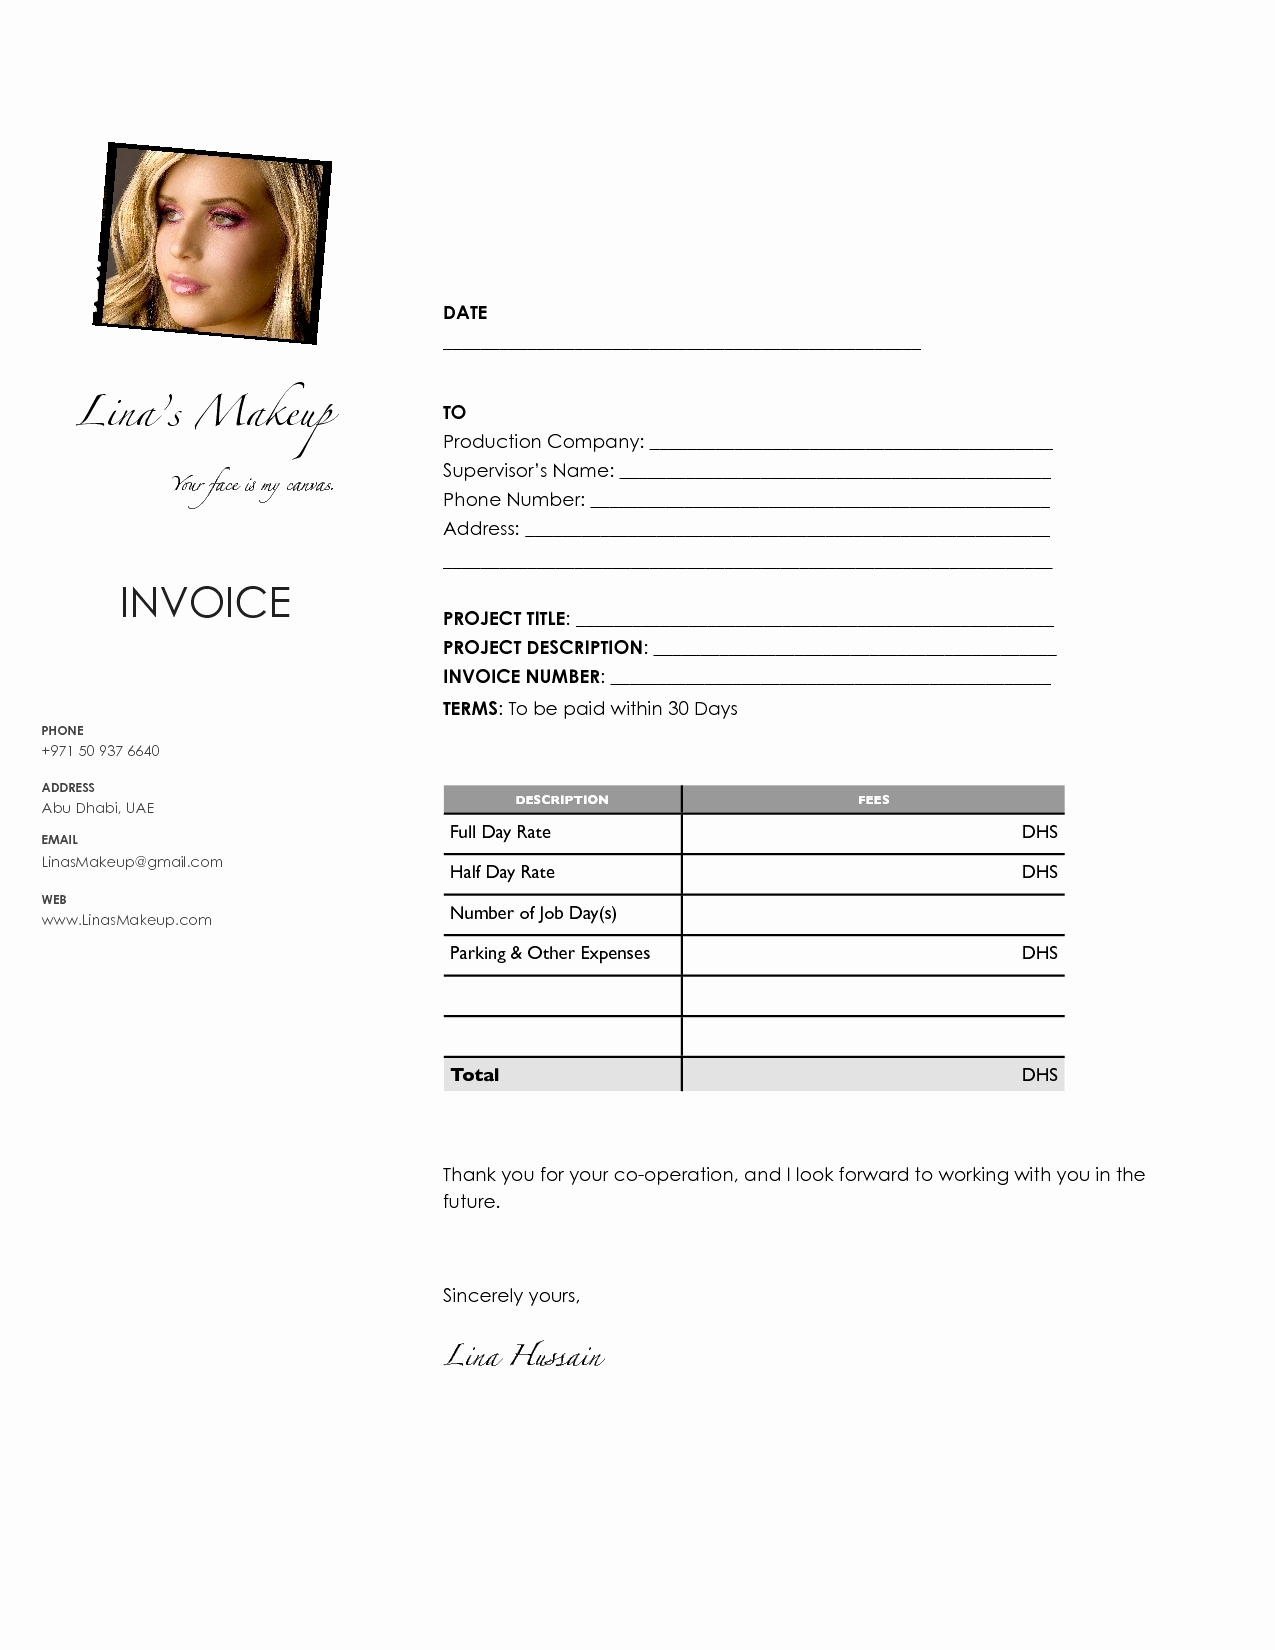 Makeup Invoice Template New Artist Invoice Template Elegant Makeup To Artist Invoice Samples